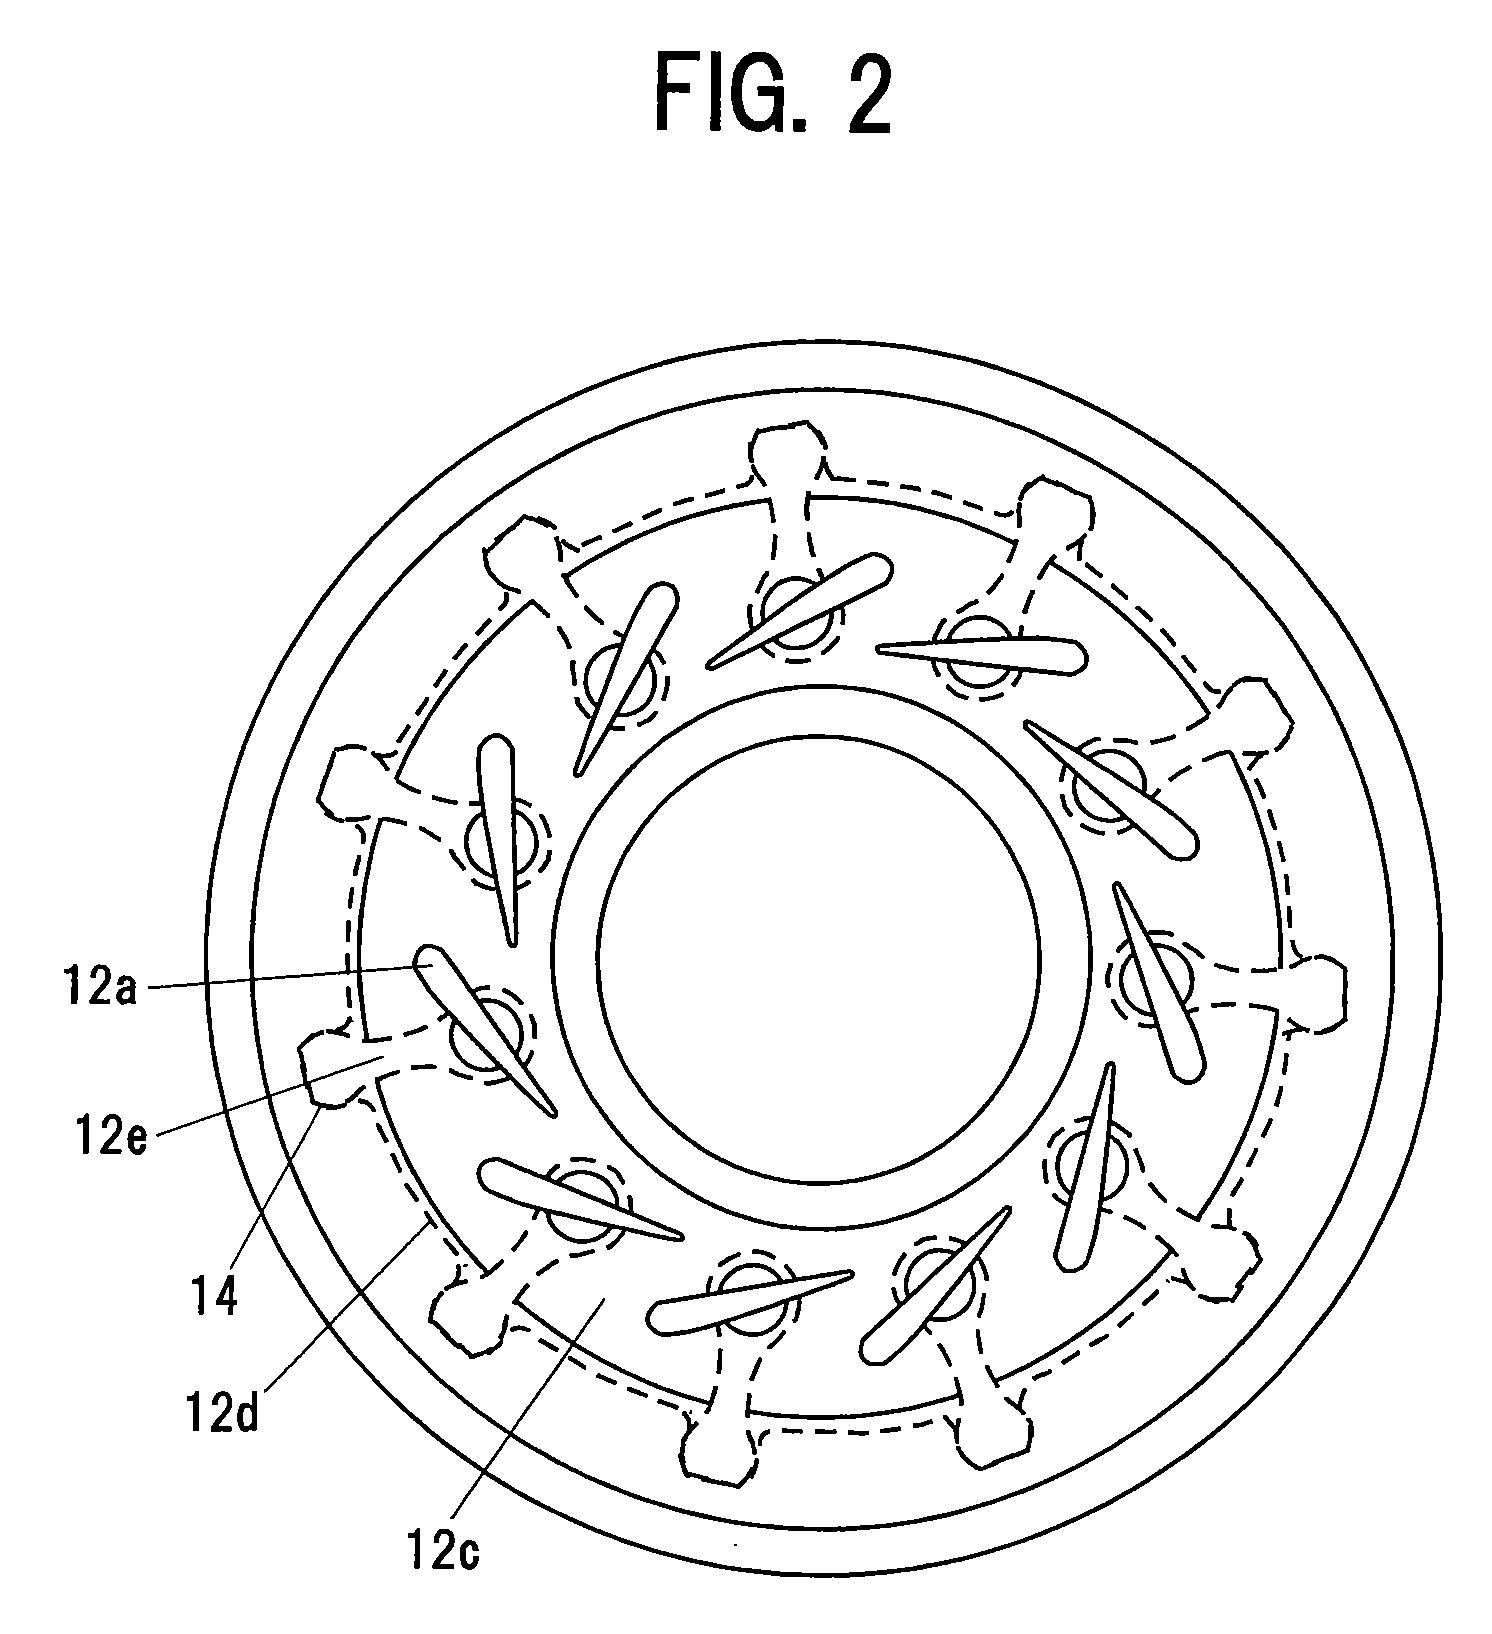 Turbocharger with variable nozzle